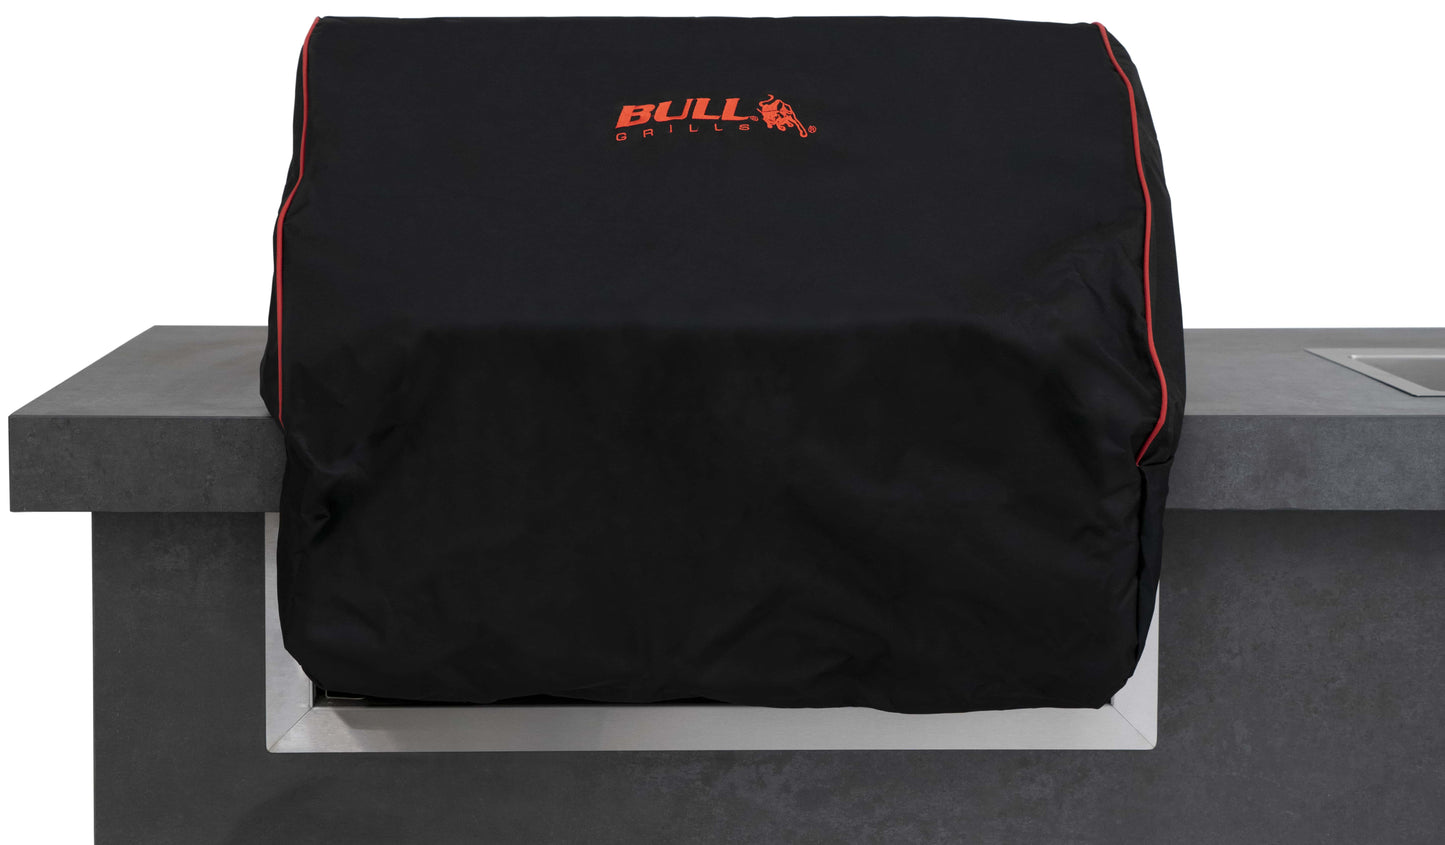 60cm Bull Steer Grill Premium Cover (Black With Red Piping)